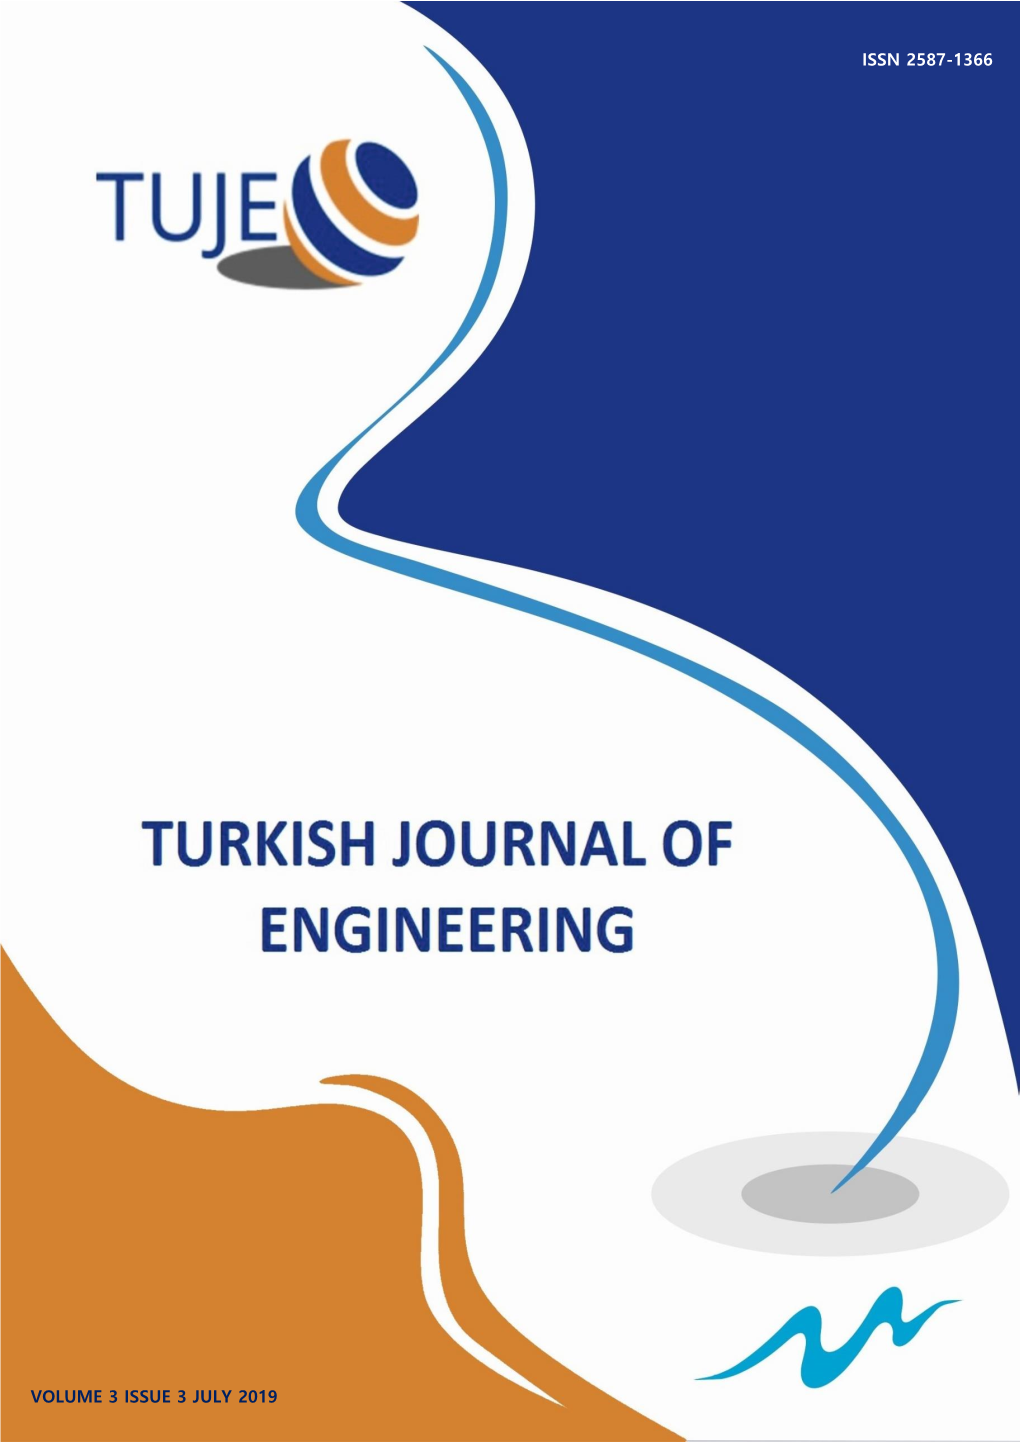 Volume 3 Issue 3 July 2019 Issn 2587-1366